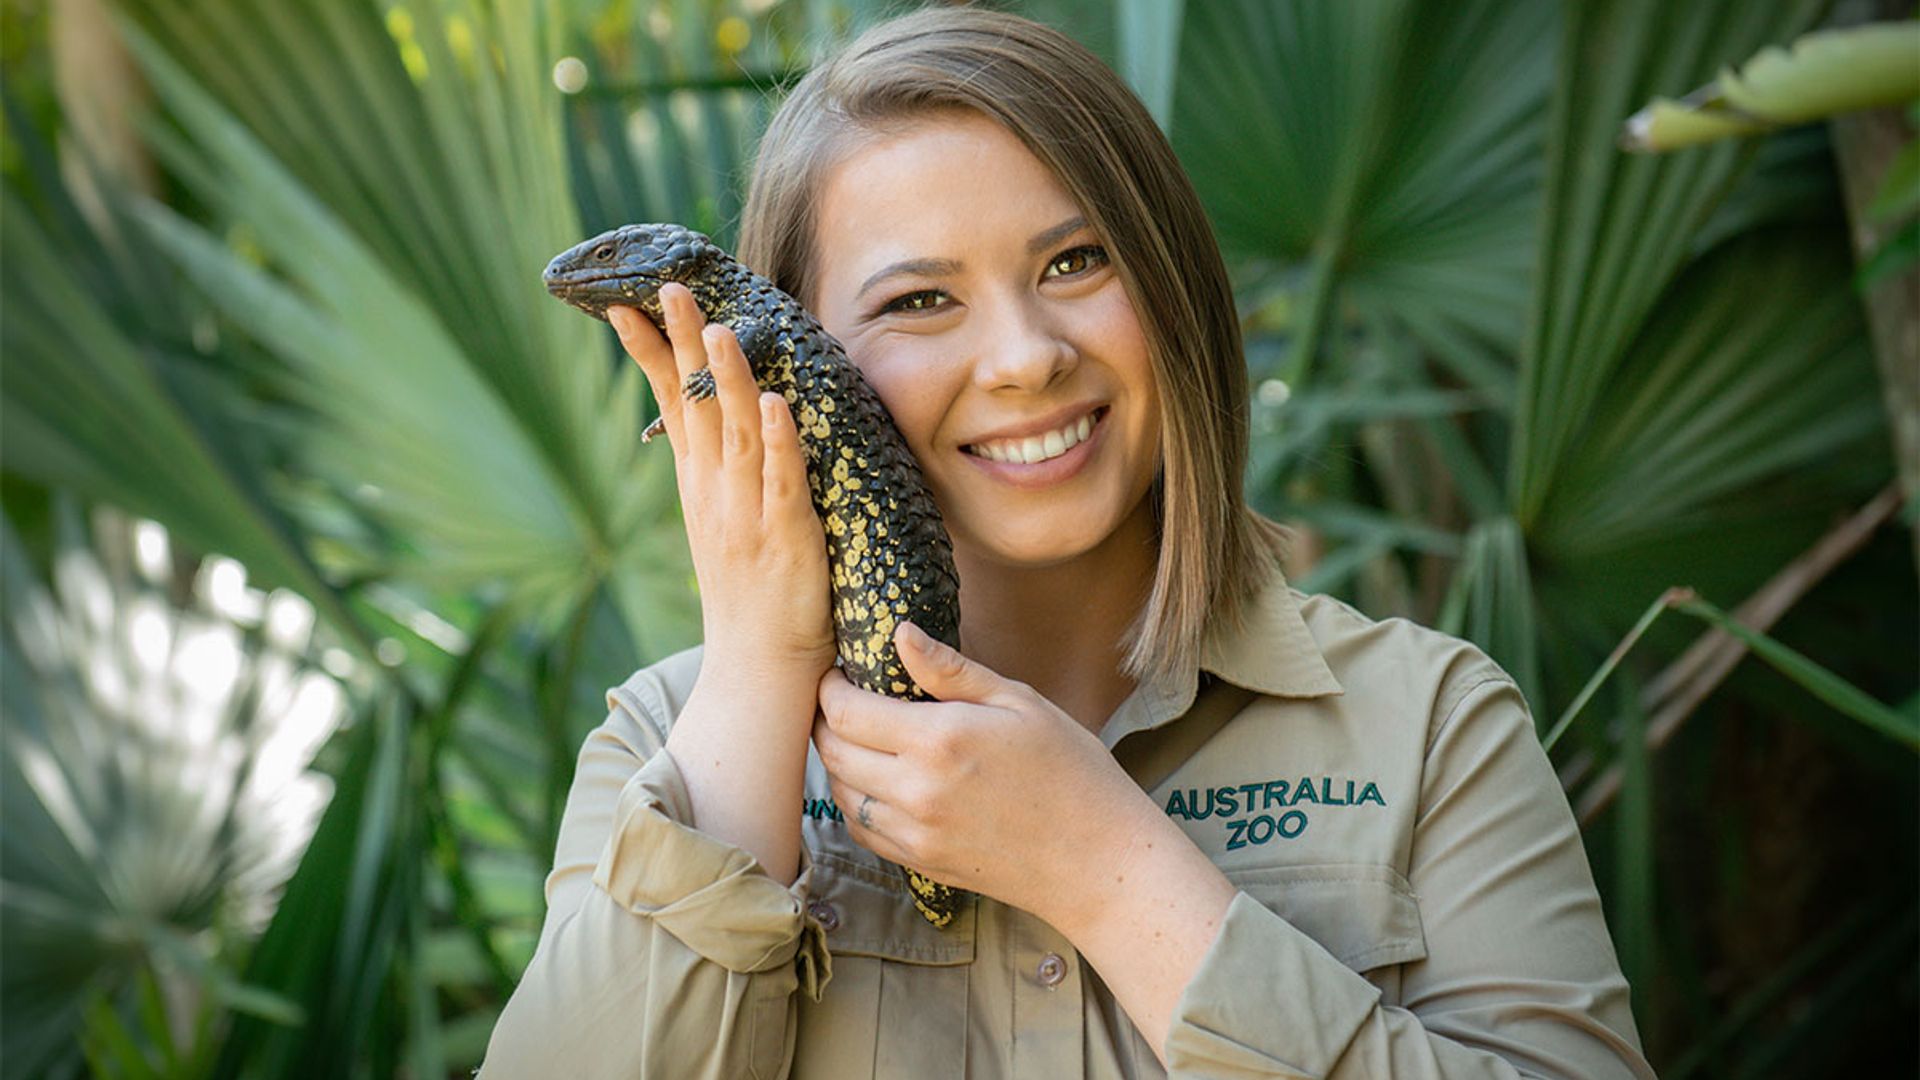 Bindi Irwin's beautiful letter: 'kindness can quite literally change the world'